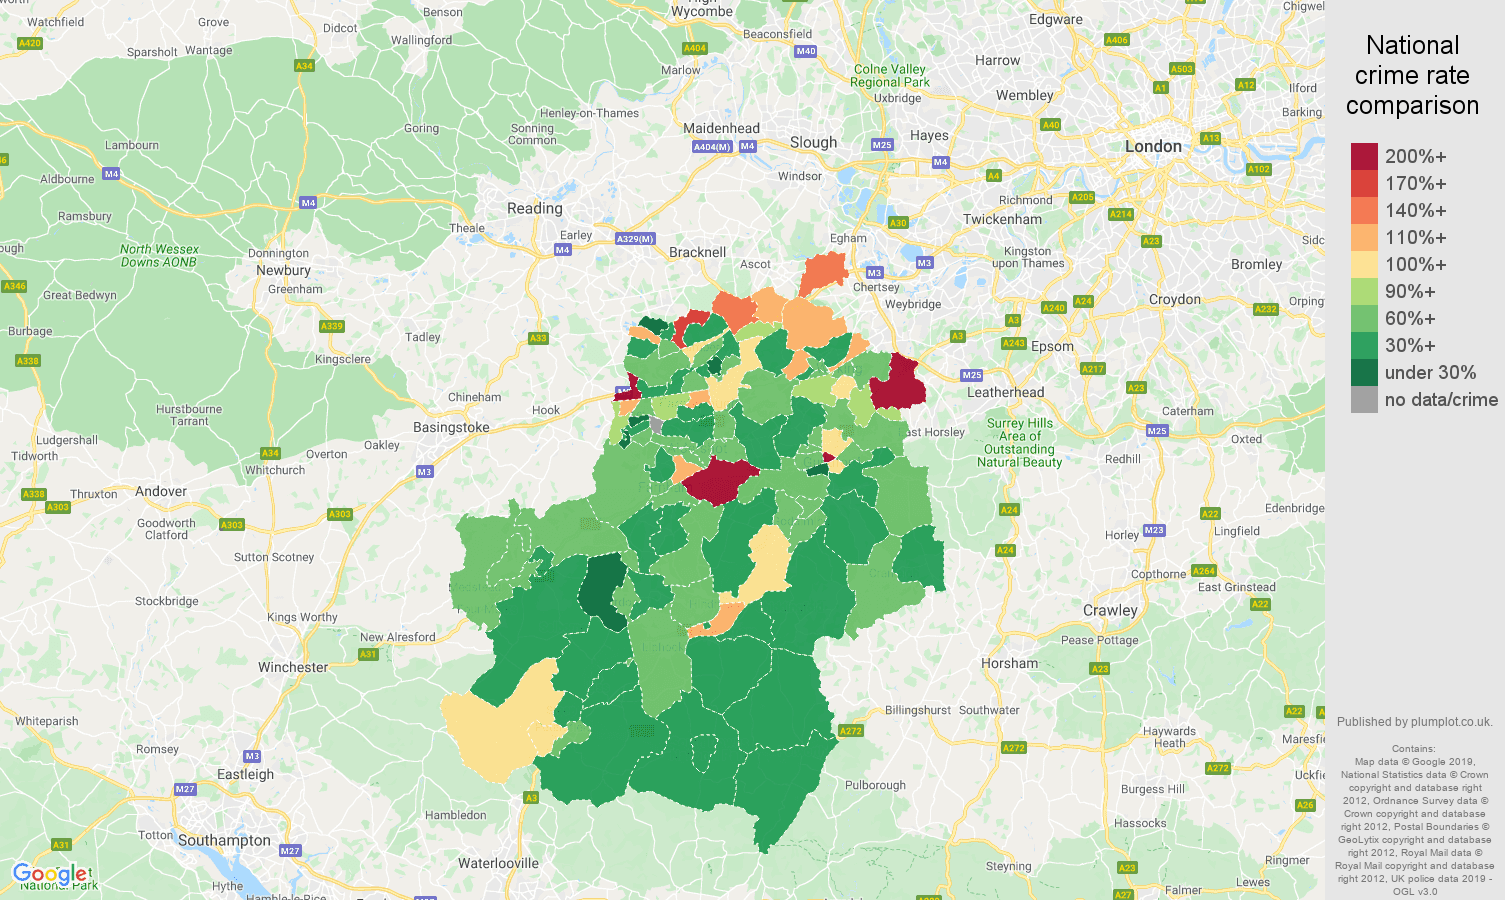 Guildford other theft crime rate comparison map